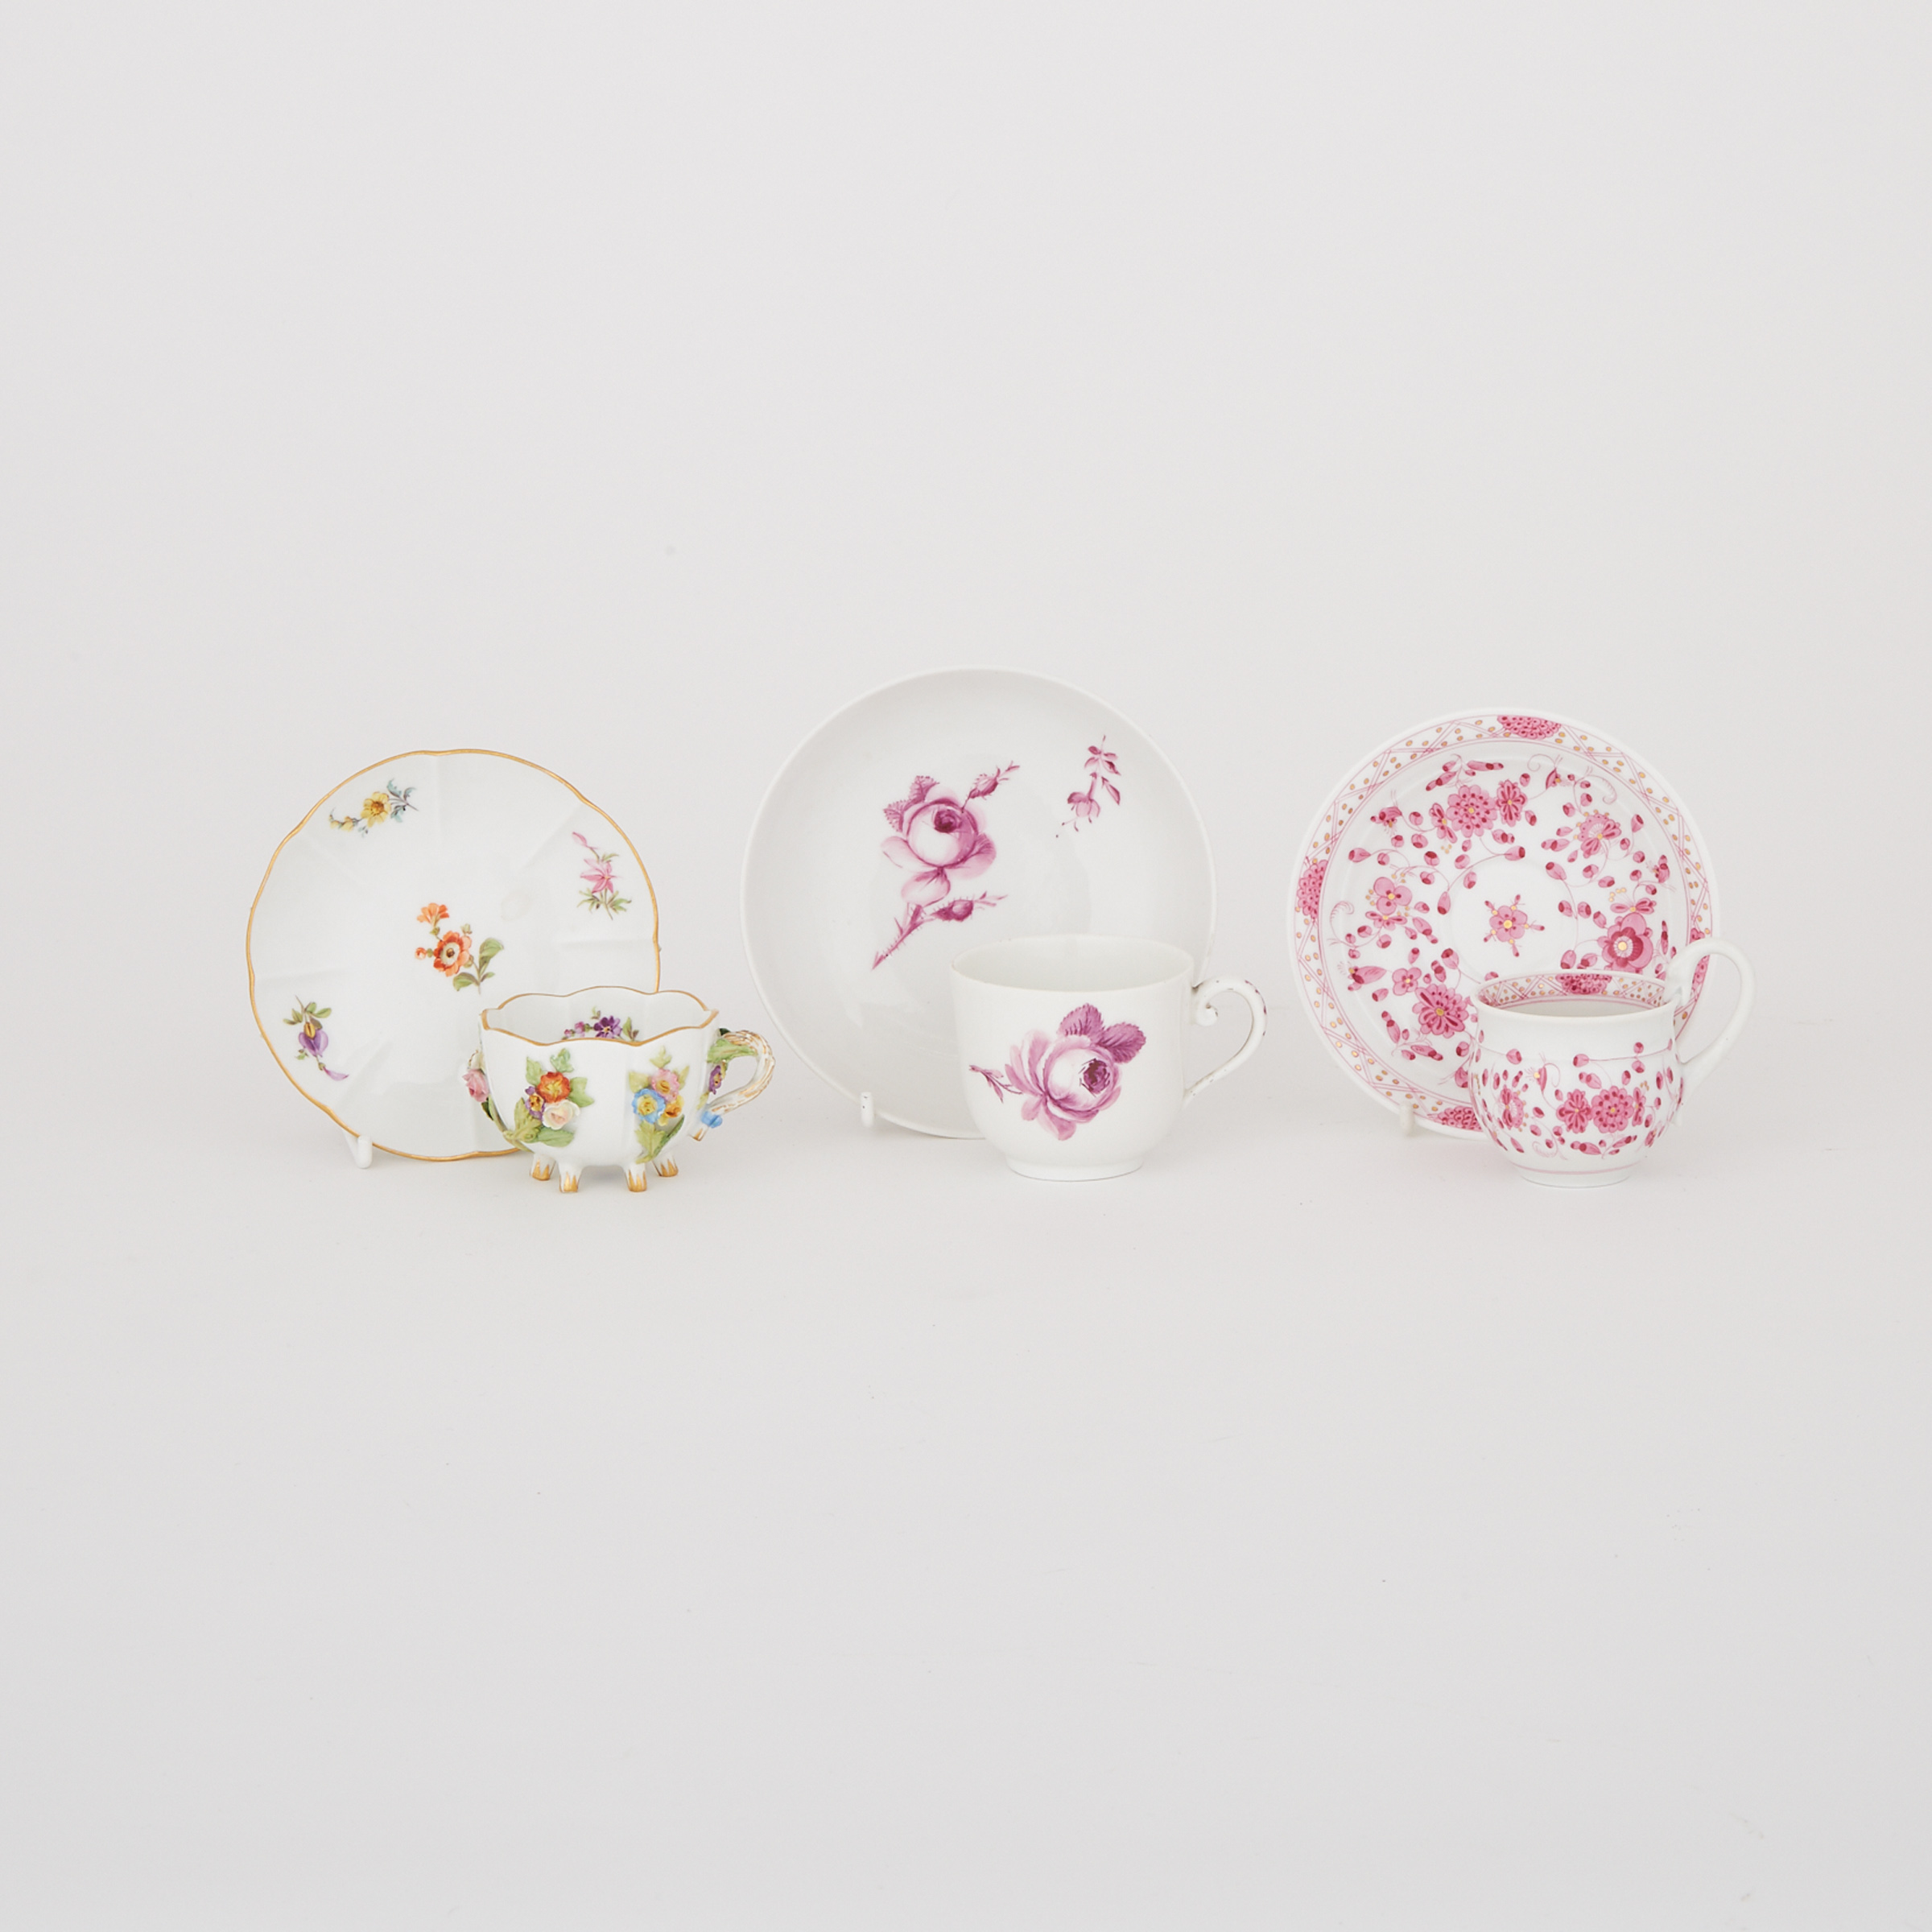 Three Meissen Small Cups and Saucers, late 18th/19th century